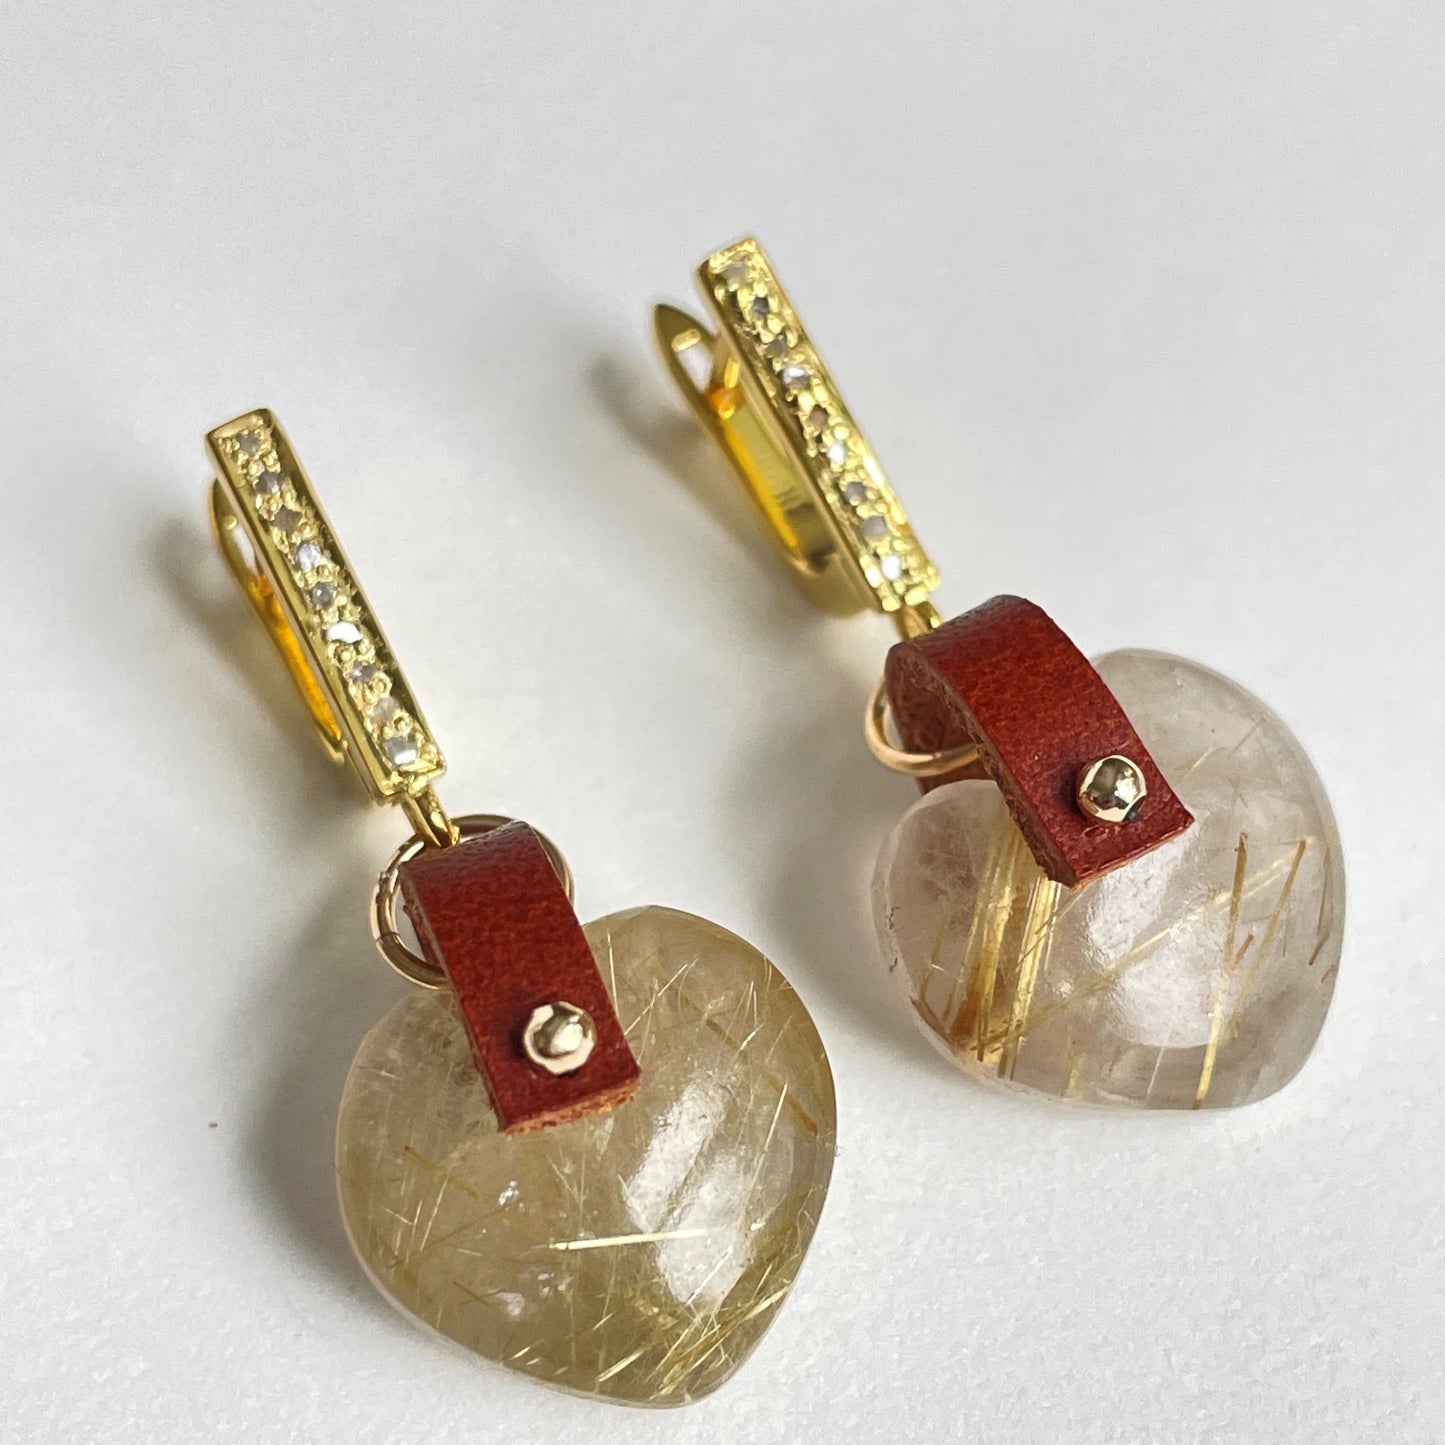 Earrings - Made in Gold, SIlver and Vermeil